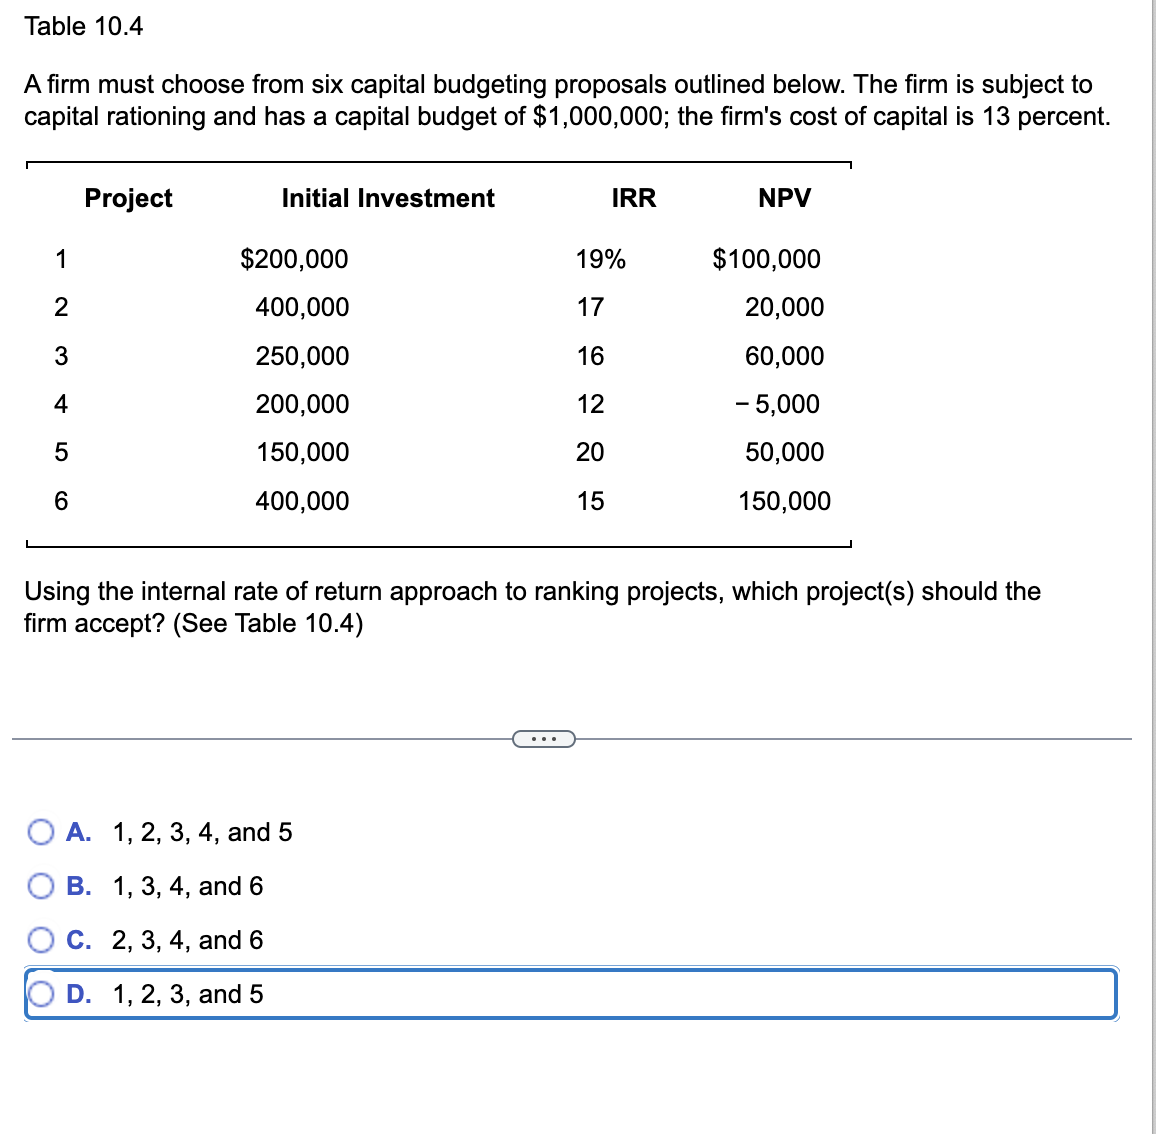 Table 10.4
A firm must choose from six capital budgeting proposals outlined below. The firm is subject to
capital rationing and has a capital budget of $1,000,000; the firm's cost of capital is 13 percent.
1 2 3 4 5 6
Project
Initial Investment
$200,000
400,000
250,000
200,000
150,000
400,000
IRR
O A. 1, 2, 3, 4, and 5
B. 1, 3, 4, and 6
C. 2, 3, 4, and 6
D. 1, 2, 3, and 5
19%
17
16
12
20
15
NPV
$100,000
20,000
60,000
- 5,000
50,000
150,000
Using the internal rate of return approach to ranking projects, which project(s) should the
firm accept? (See Table 10.4)